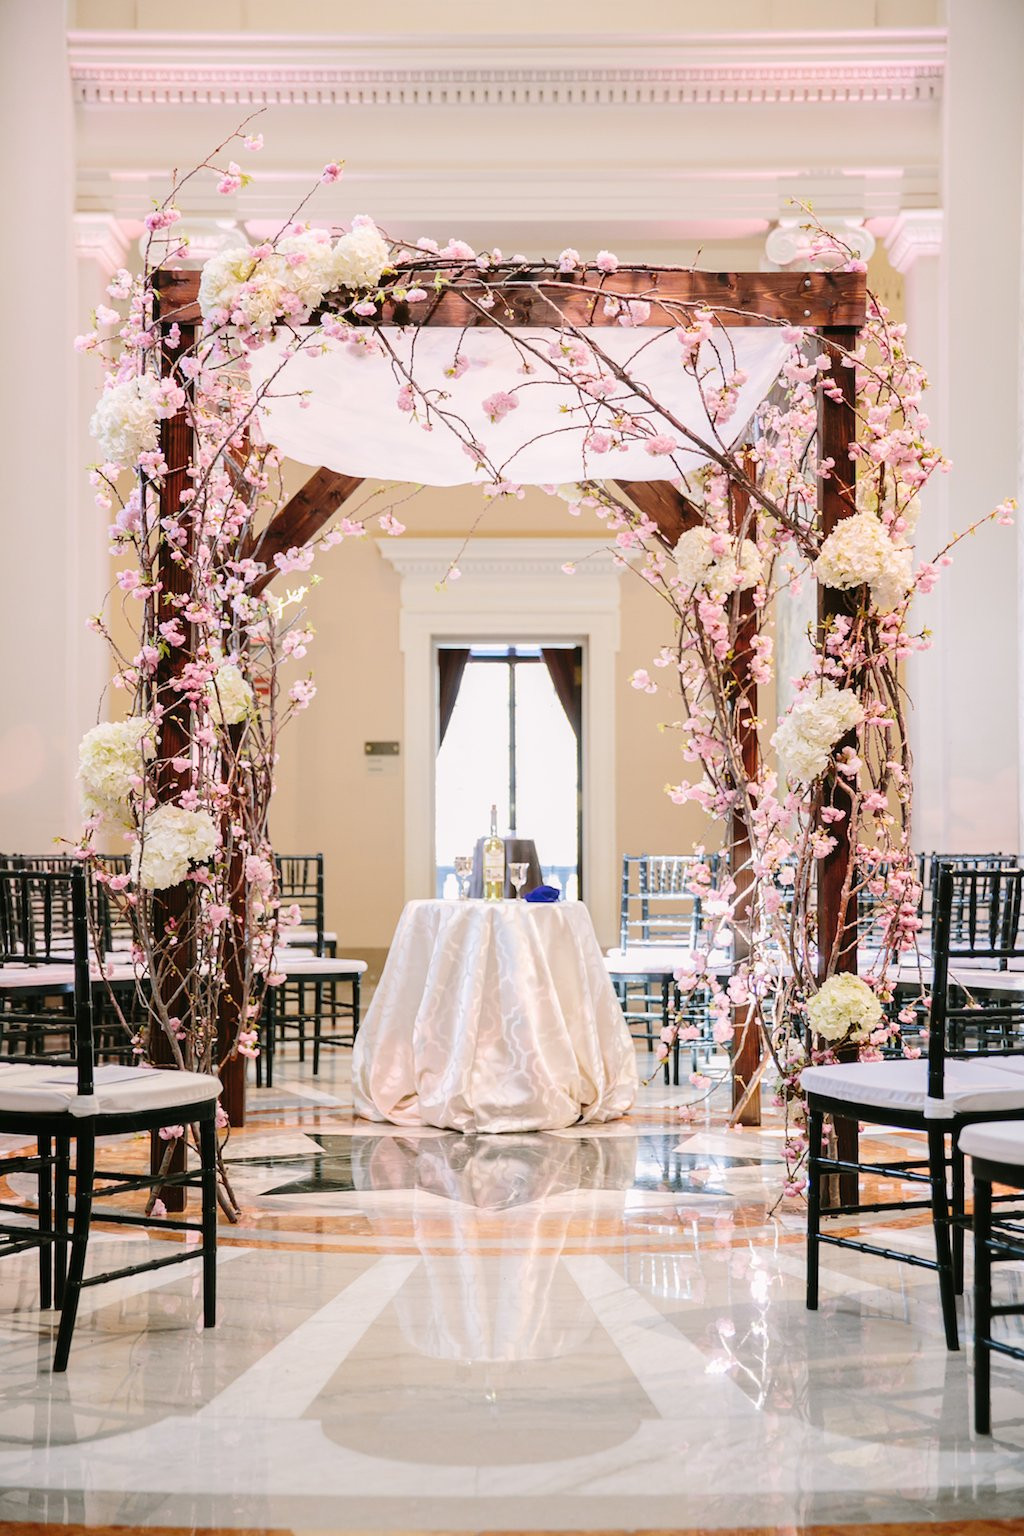 Cherry Blossom Themed Wedding
 18 Ideas to Steal for Your Cherry Blossom Themed Wedding